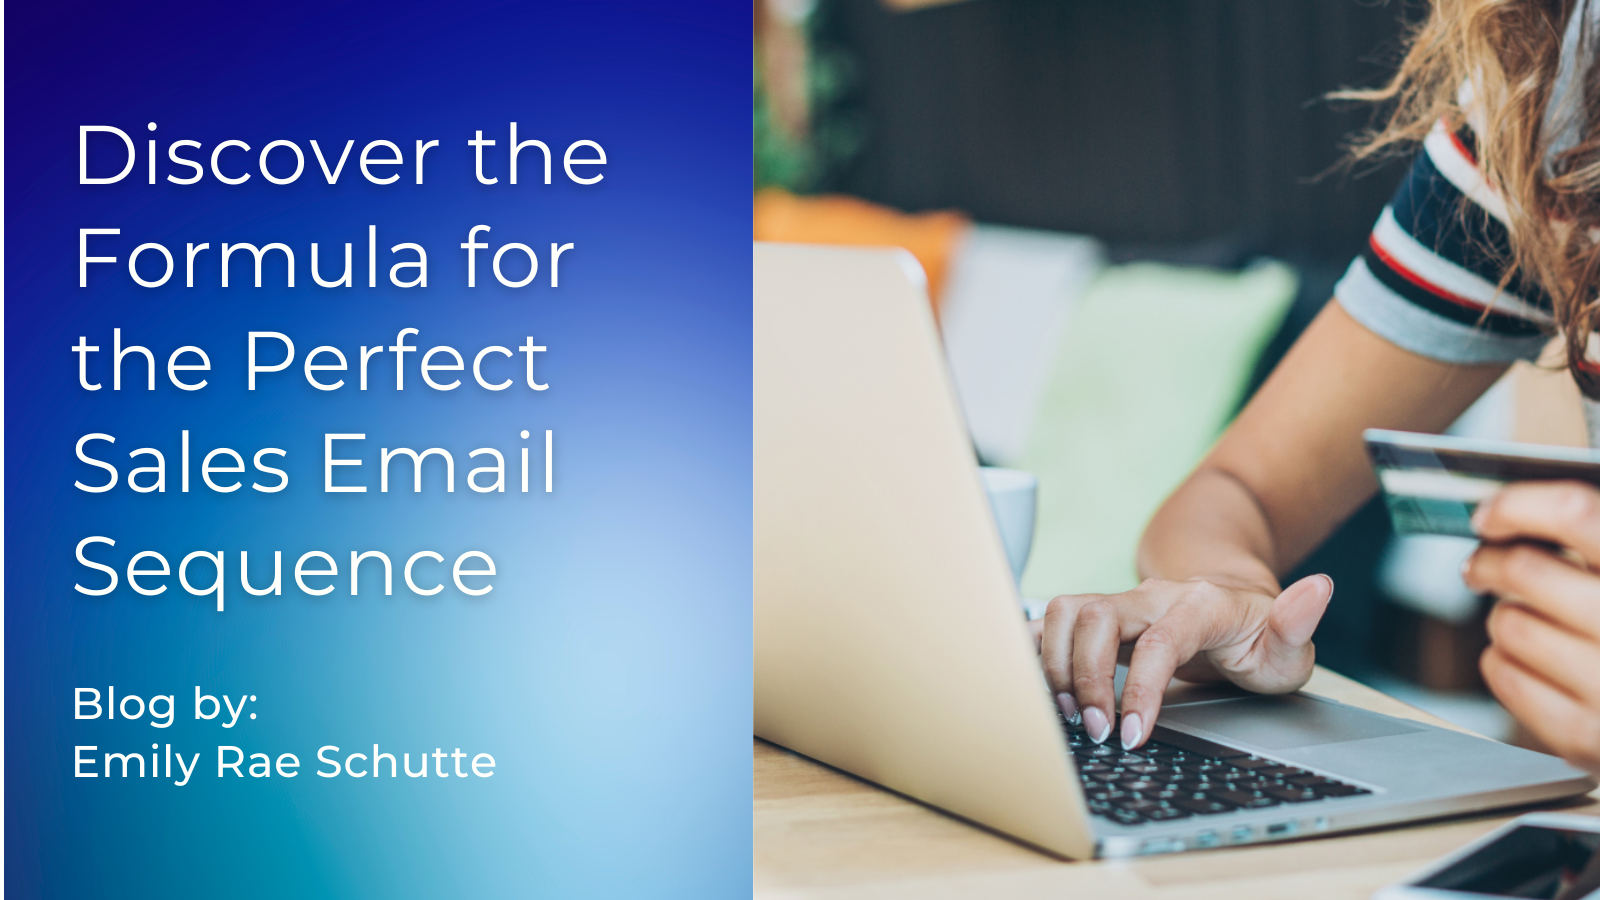 Discover the Formula for the Perfect Sales Email Sequence